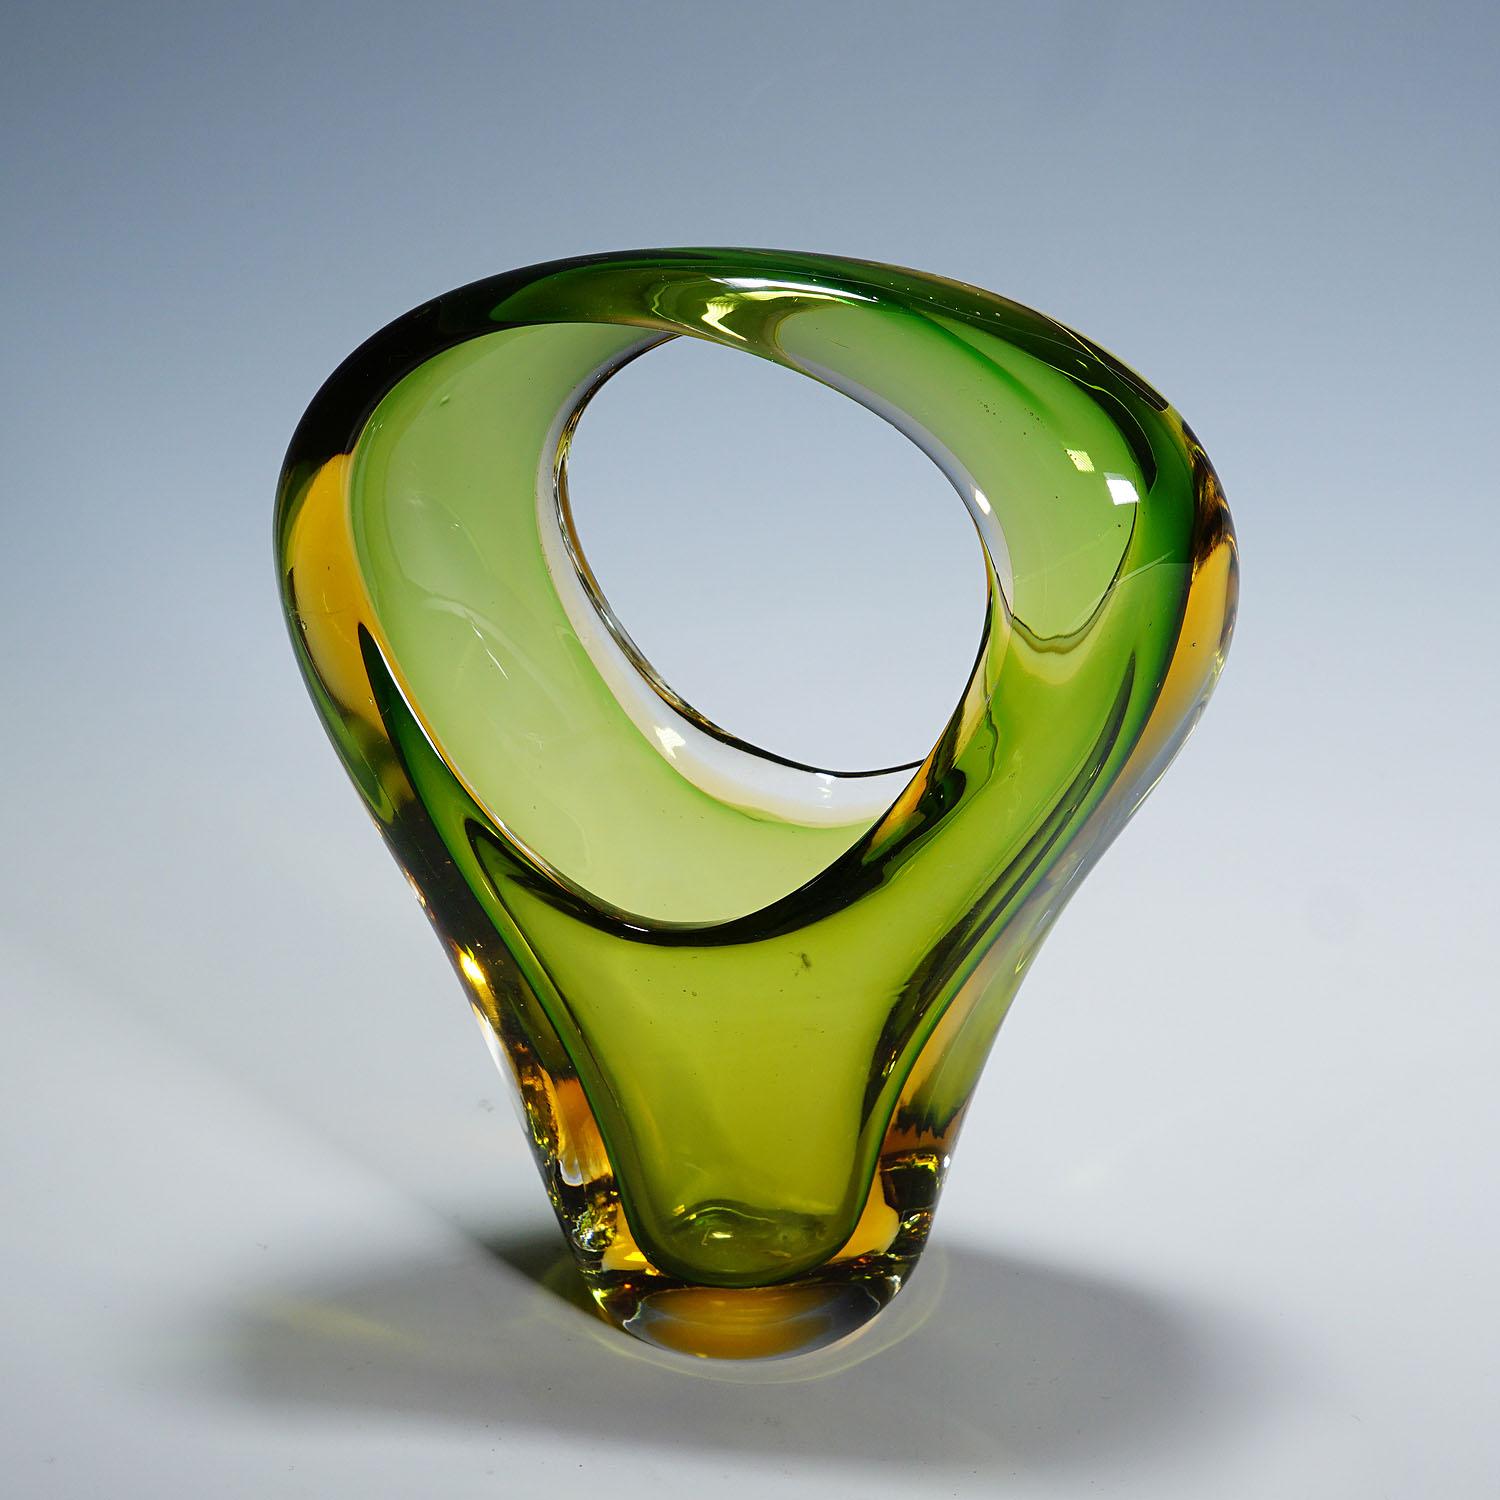 20th Century Archimede Seguso Sommerso Basket in Green and Amber, Murano Italy ca. 1950s For Sale